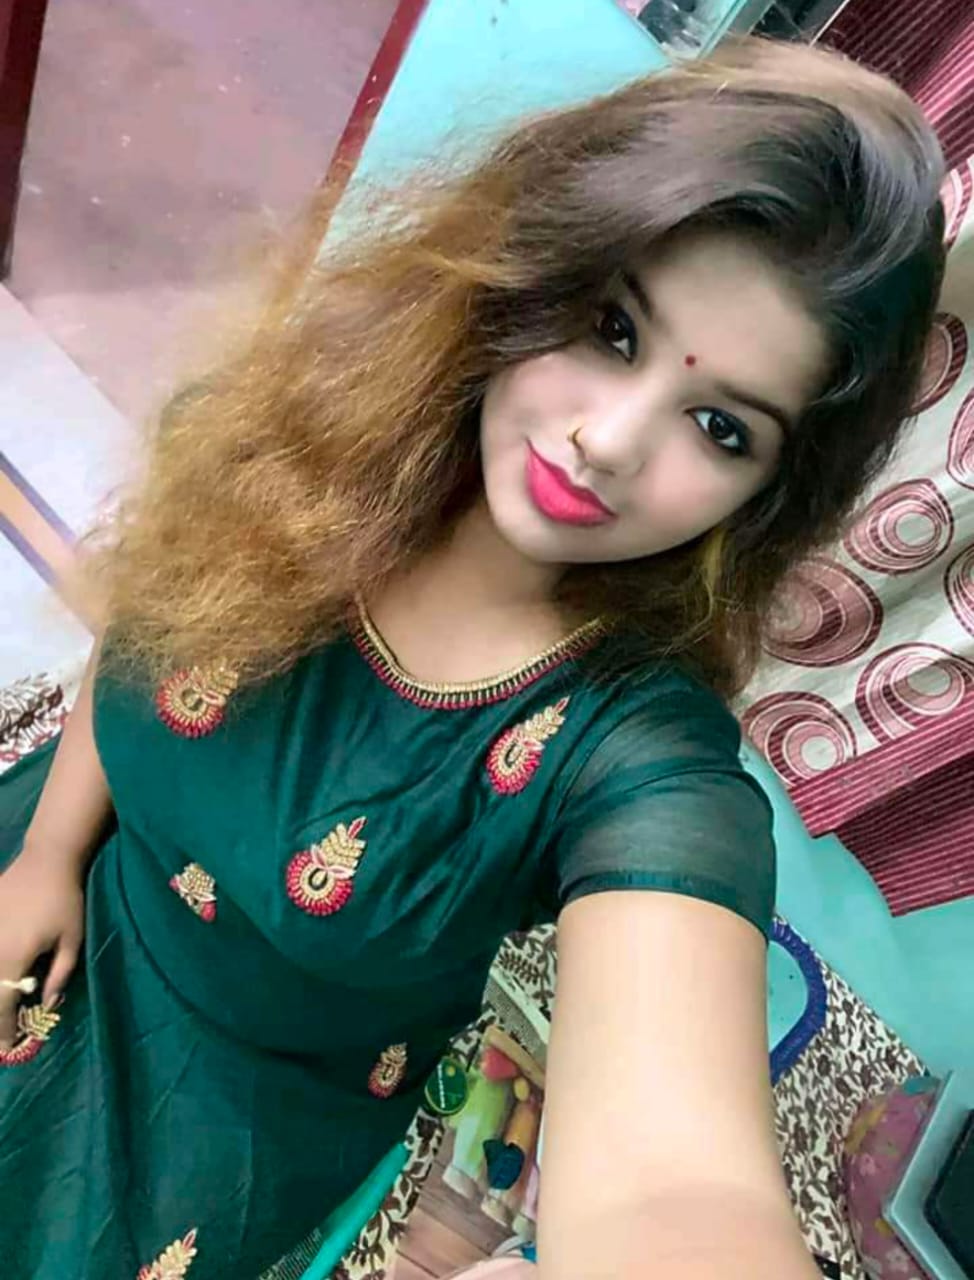 Call girl in Chandigarh Sector 20 